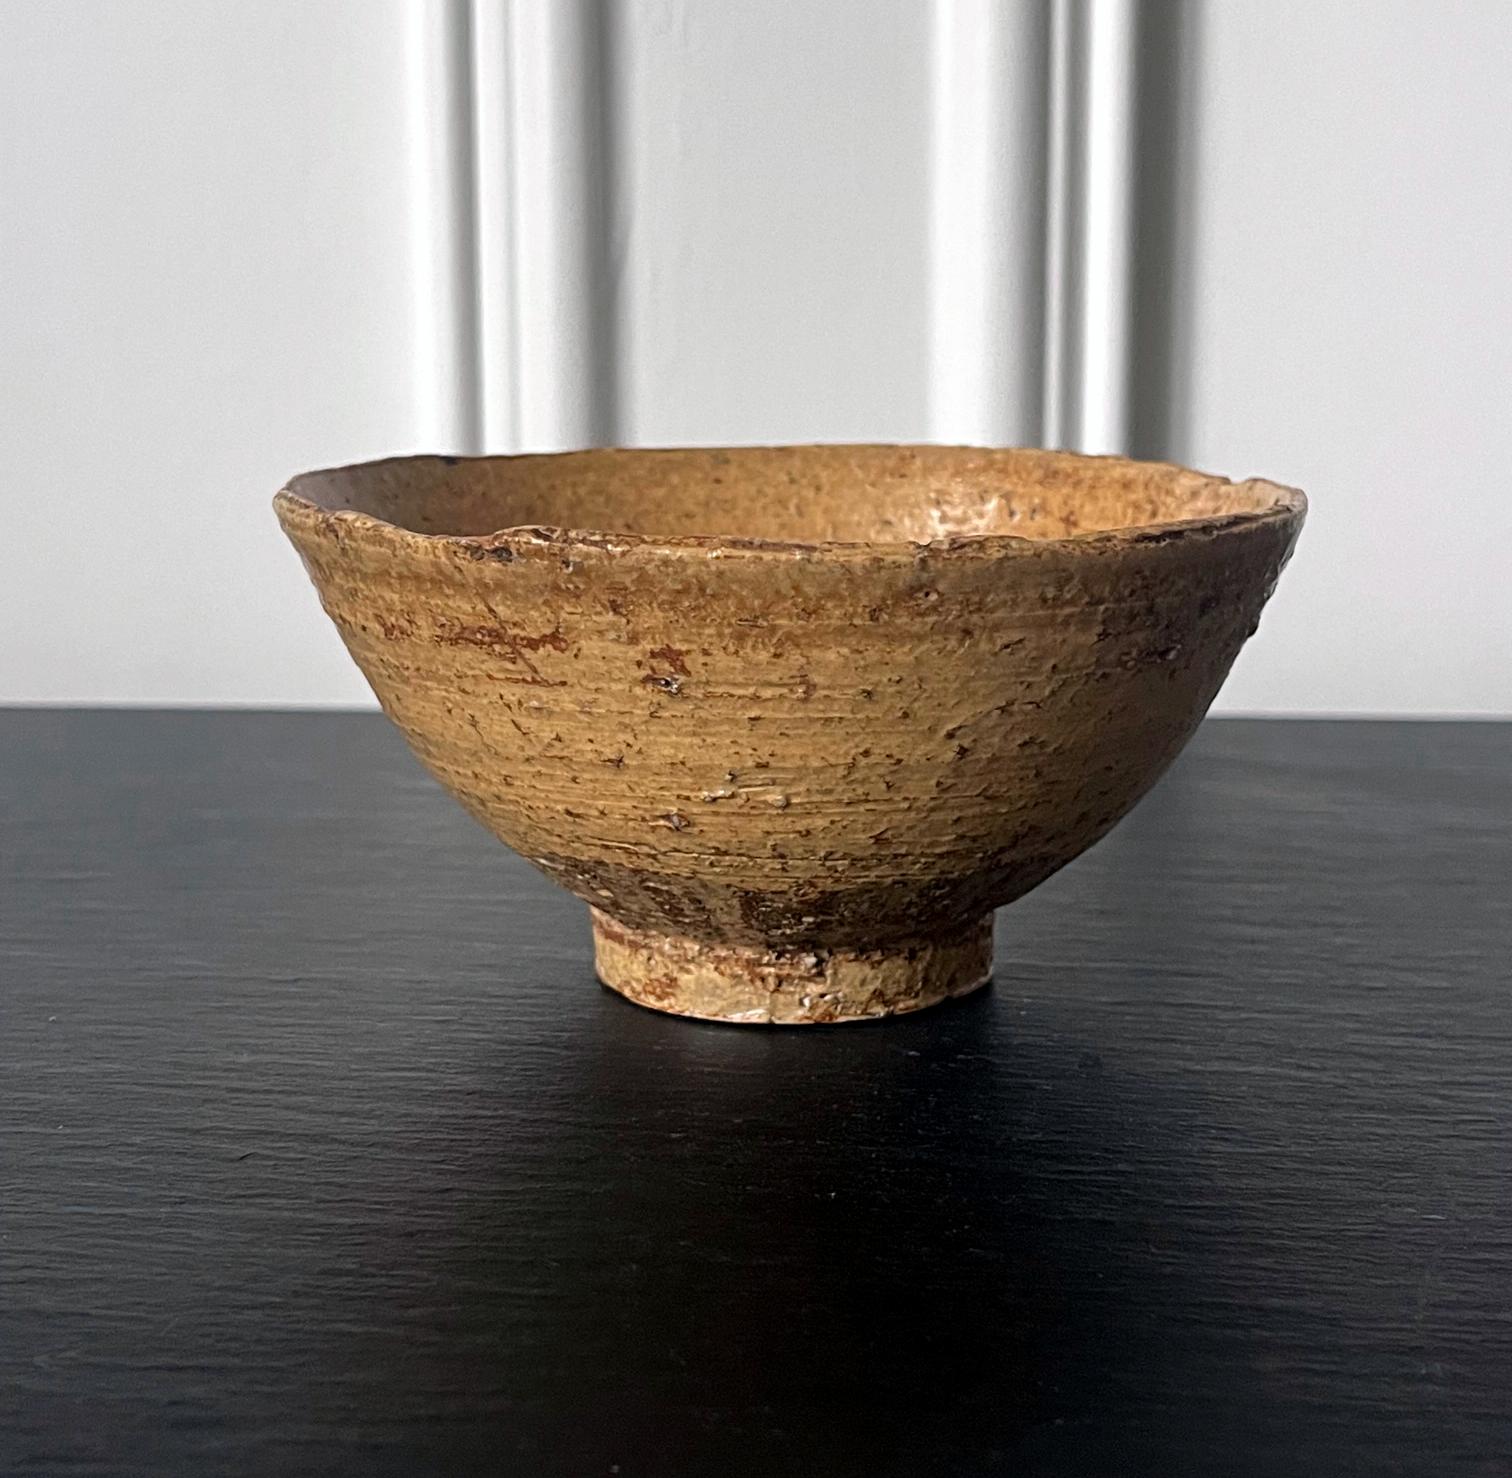 A ceramic chawan tea bowl made in Korea for Japanese market circa 17th century. The chawan is identified as Ki- Irabo type (Yellow Irabo). Irabo bowls were essentially considered as the second generation or late period Korean export, made